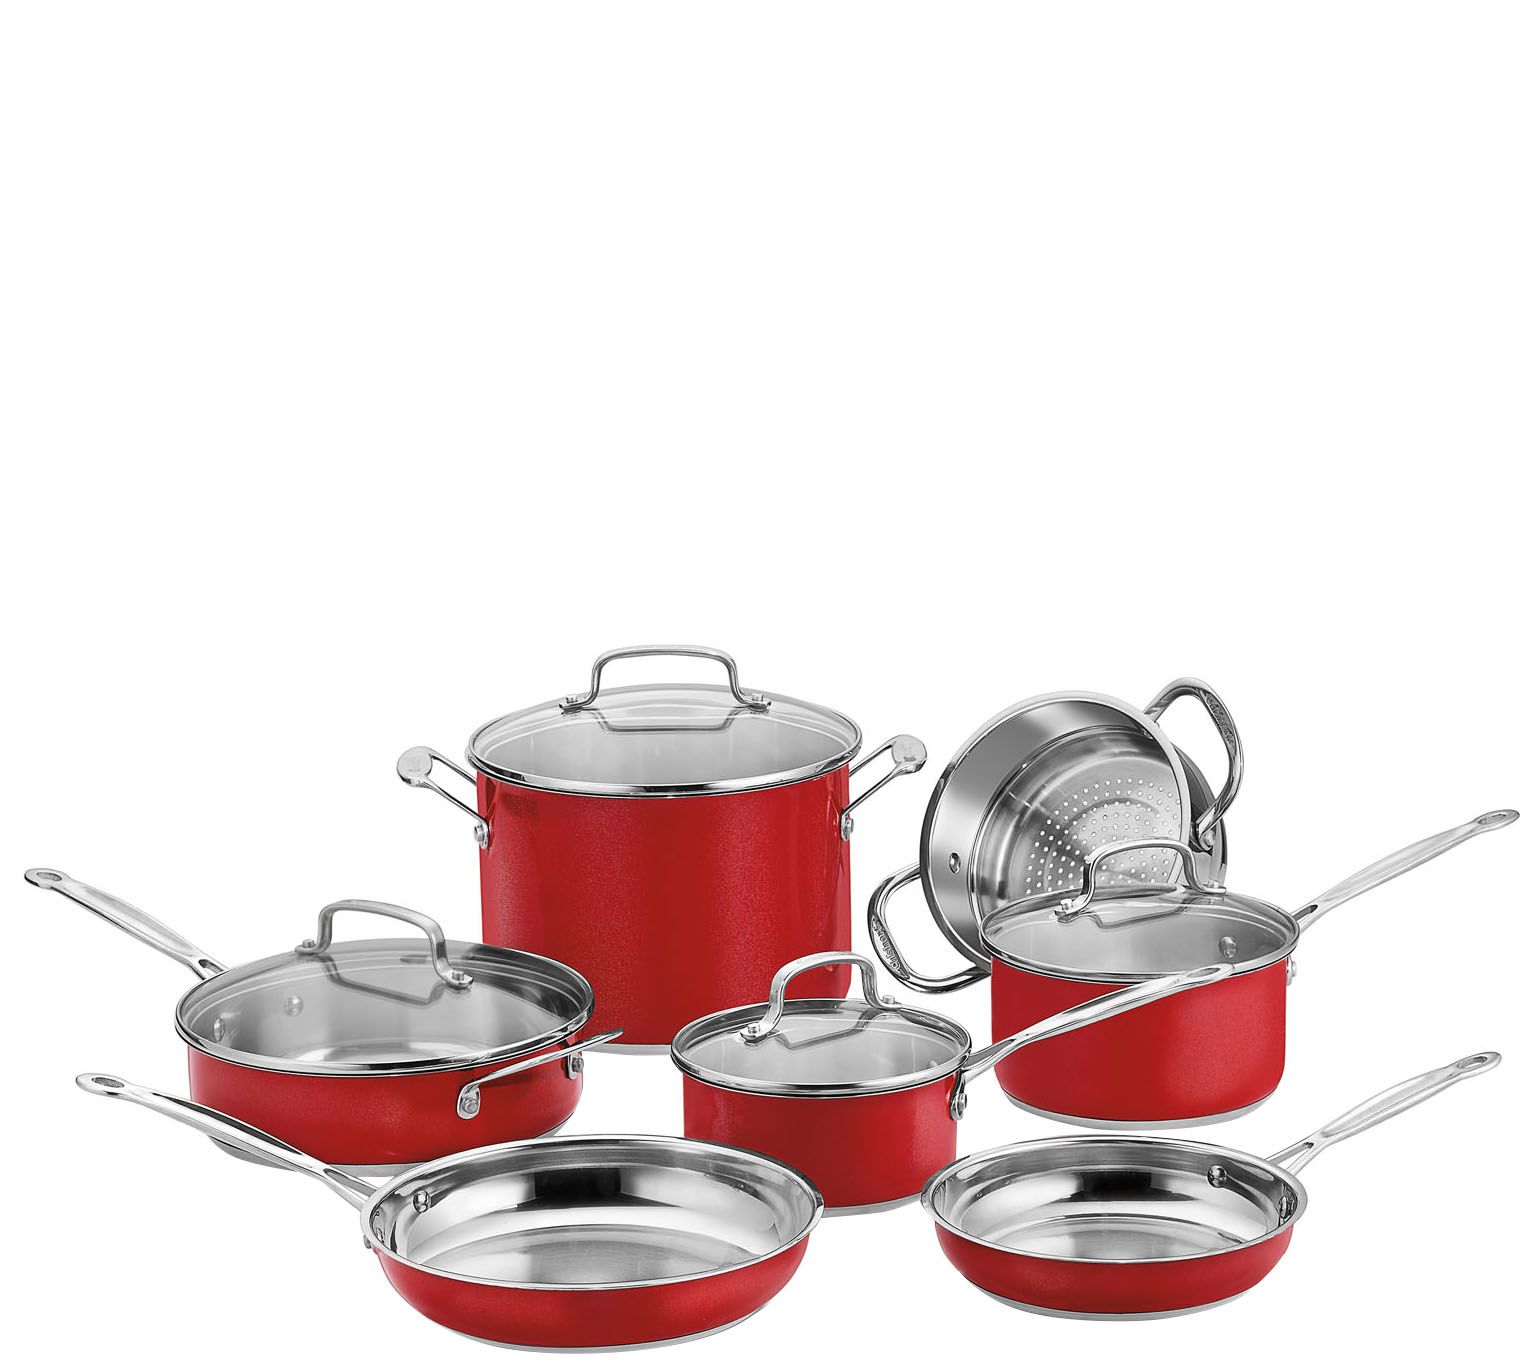 Cuisinart Classic 2.5qt Stainless Steel Saucepan With Cover And